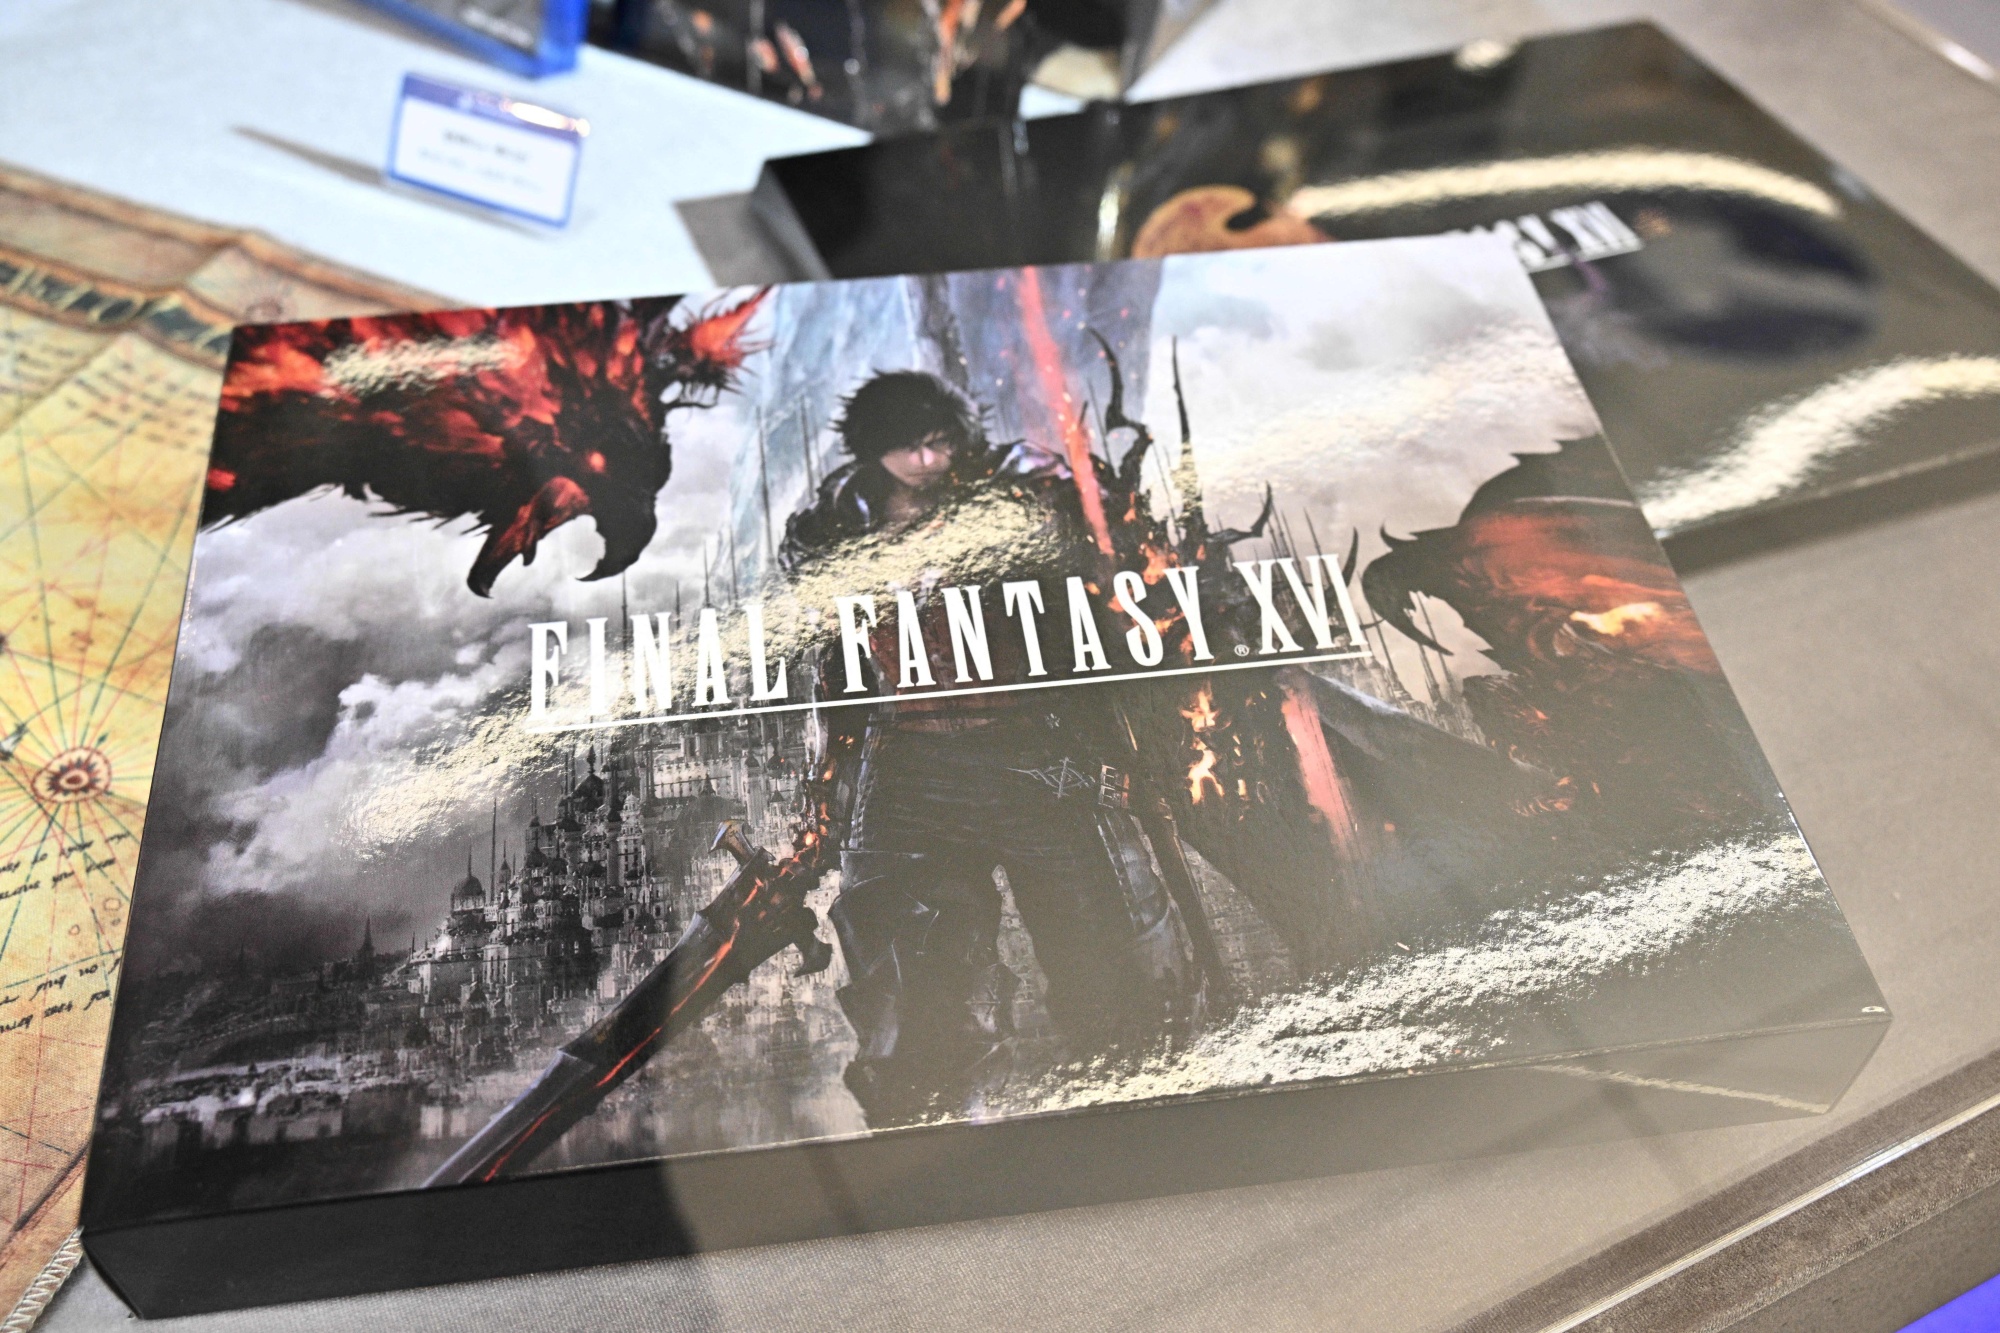 Final Fantasy XVI video game displayed at a PlayStation pop up store in Seoul.